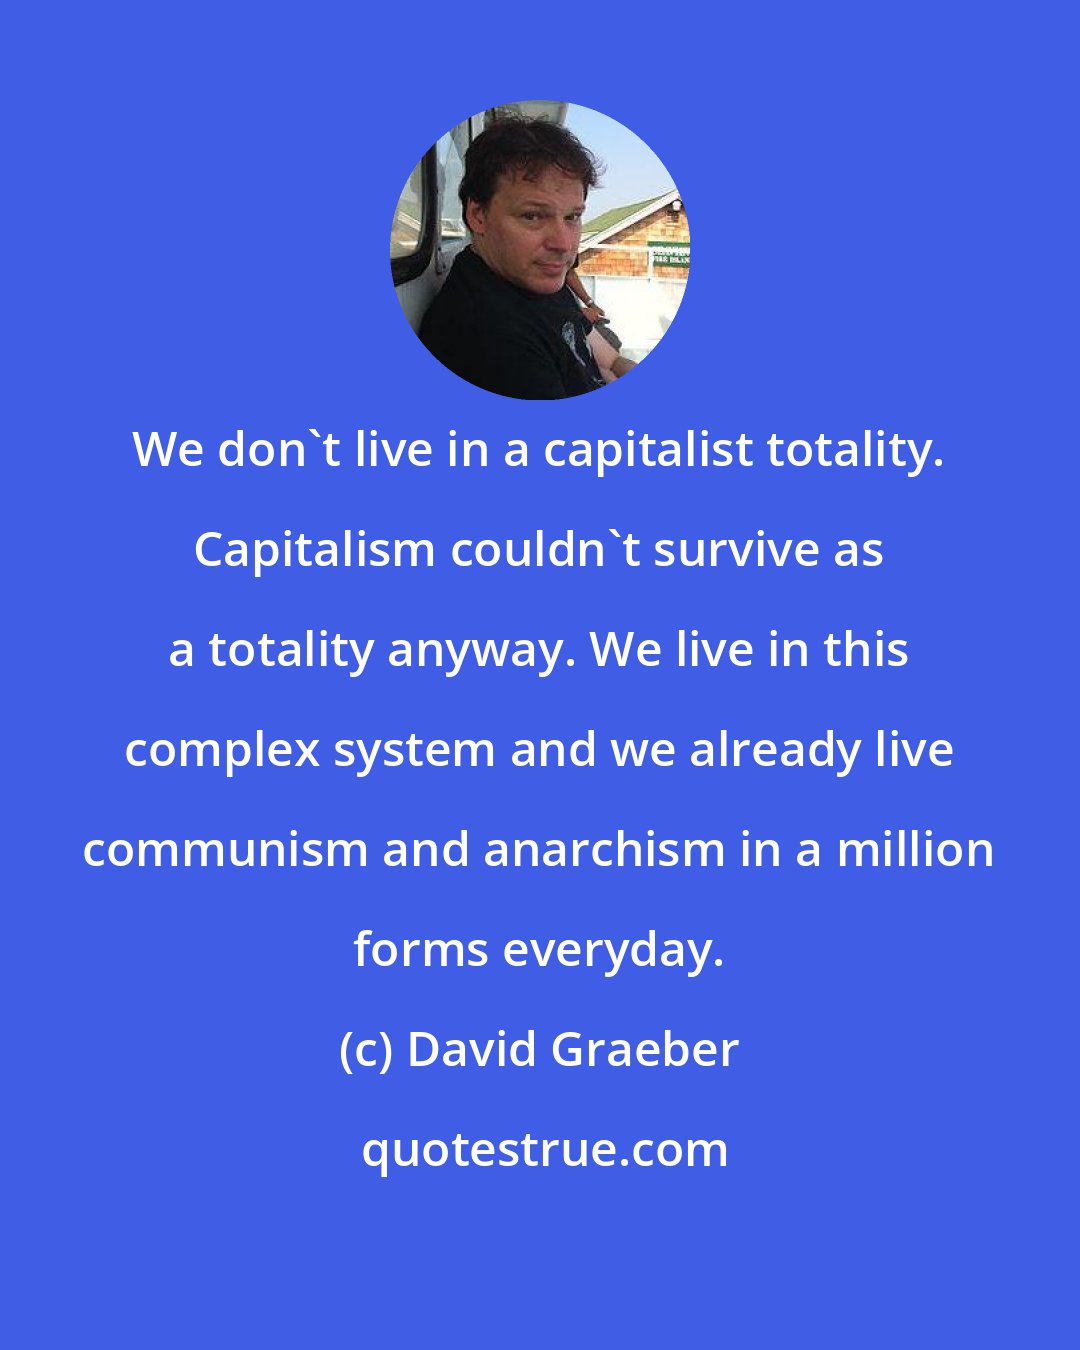 David Graeber: We don't live in a capitalist totality. Capitalism couldn't survive as a totality anyway. We live in this complex system and we already live communism and anarchism in a million forms everyday.